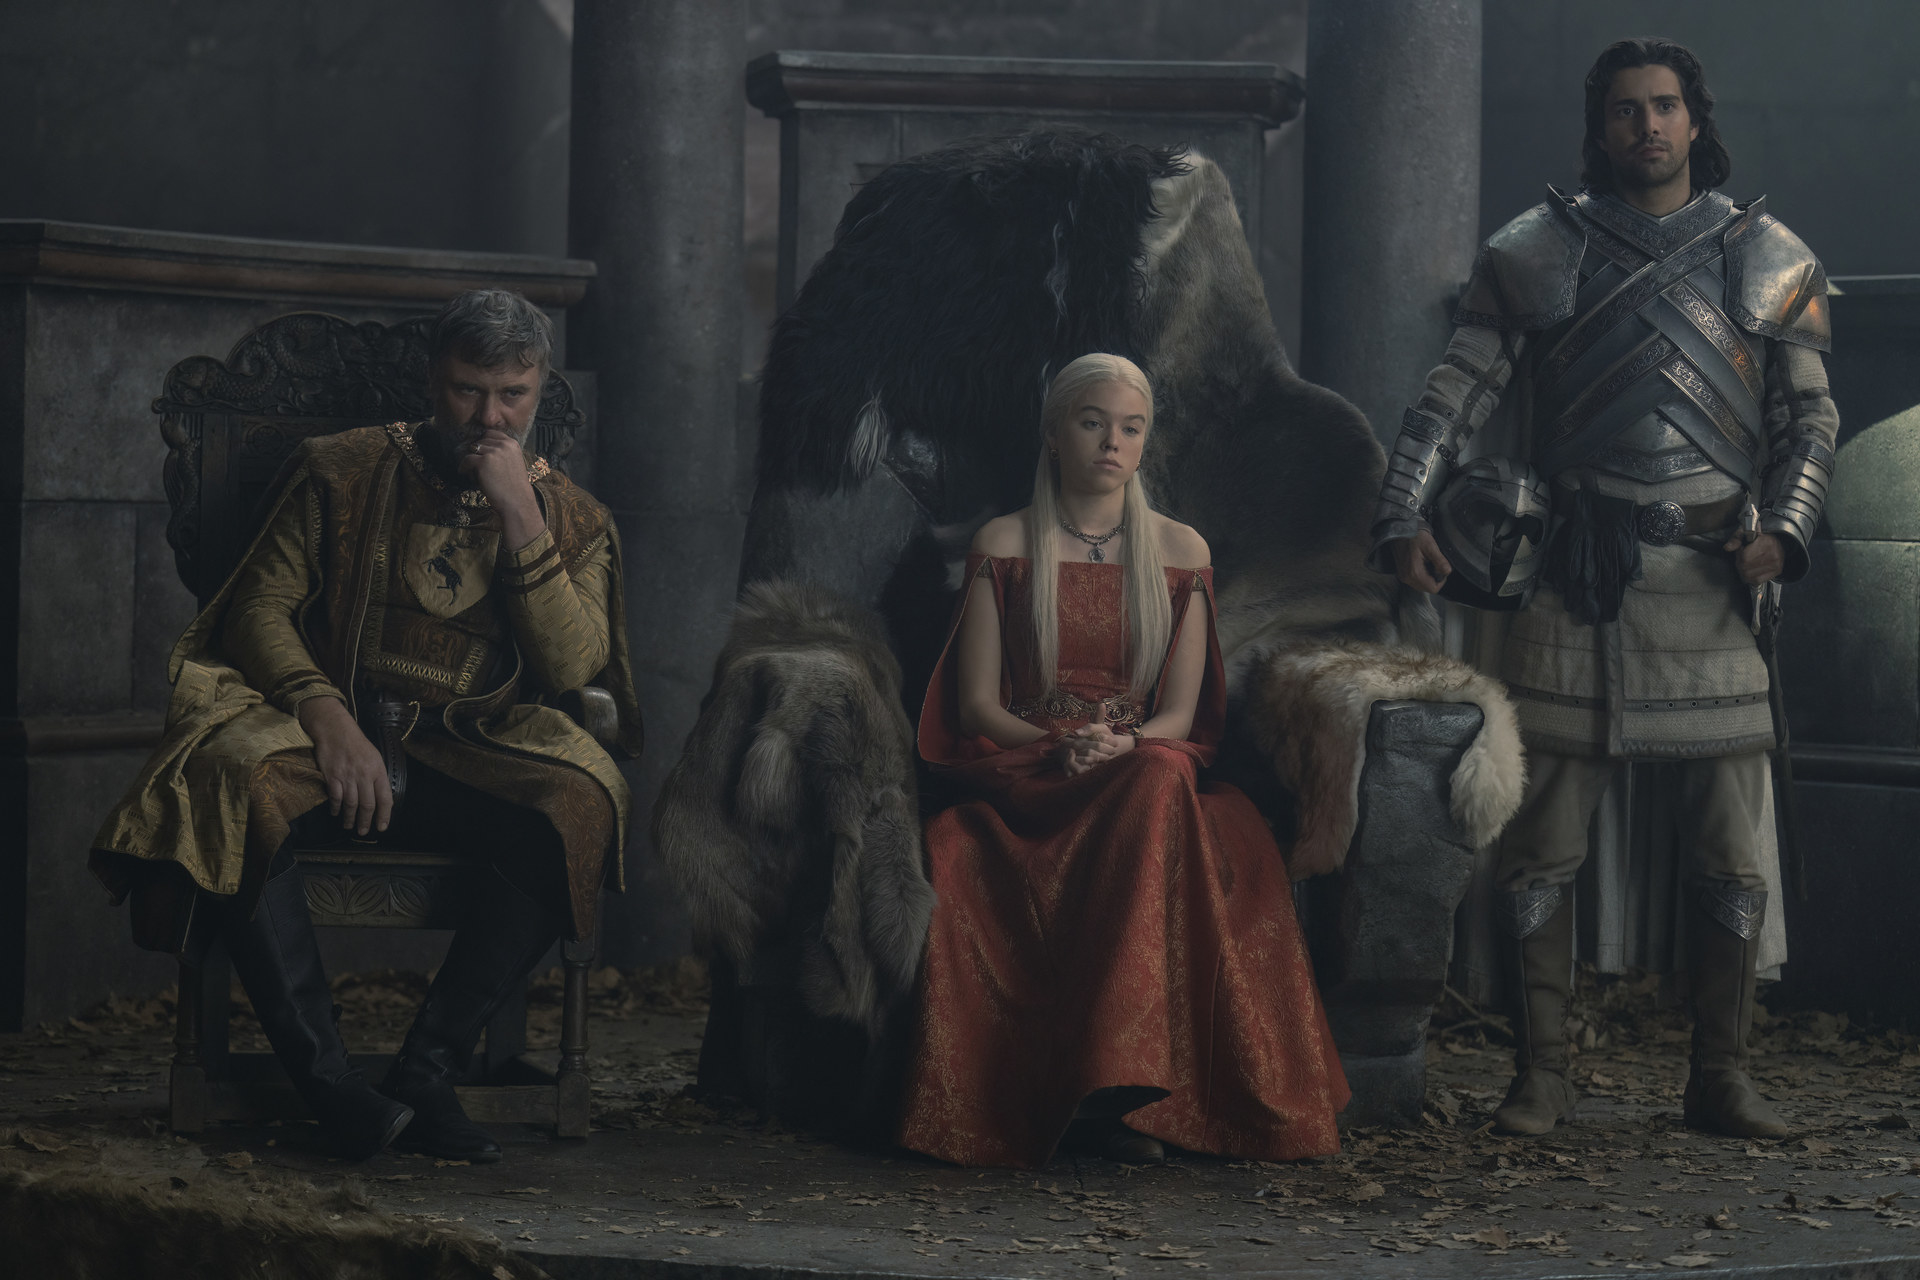 Rhaenyrs sits between Boremund Baratheon and Criston Cole wearing a red off-the-shoulder dress